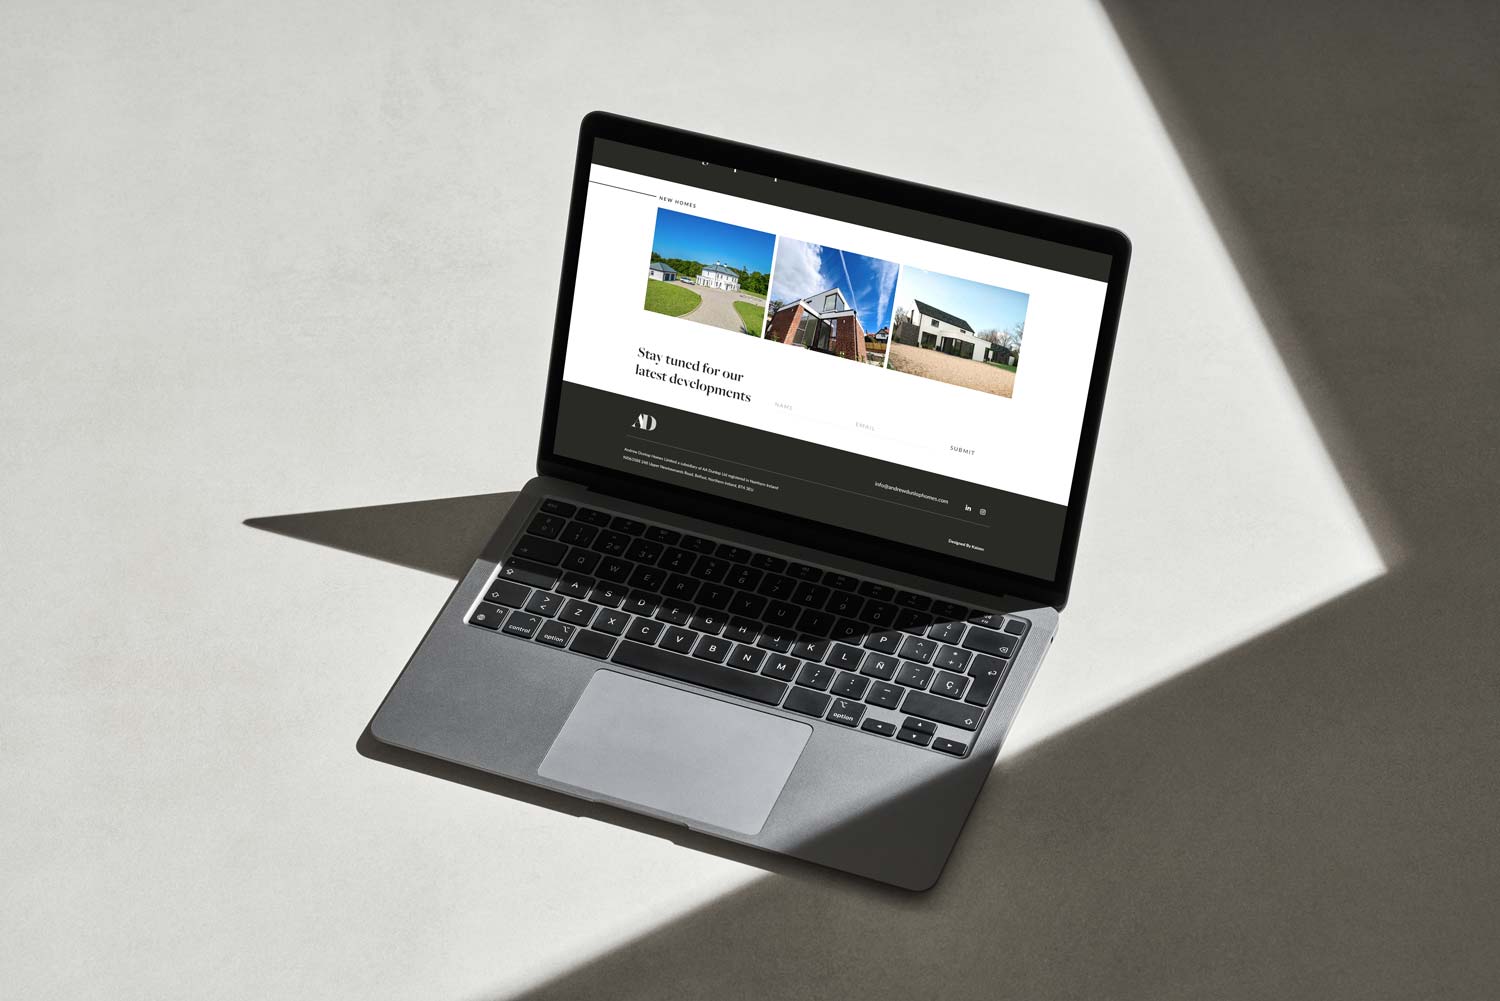 We Are Kaizen Andrew Dunlop Homes Homes website on a laptop